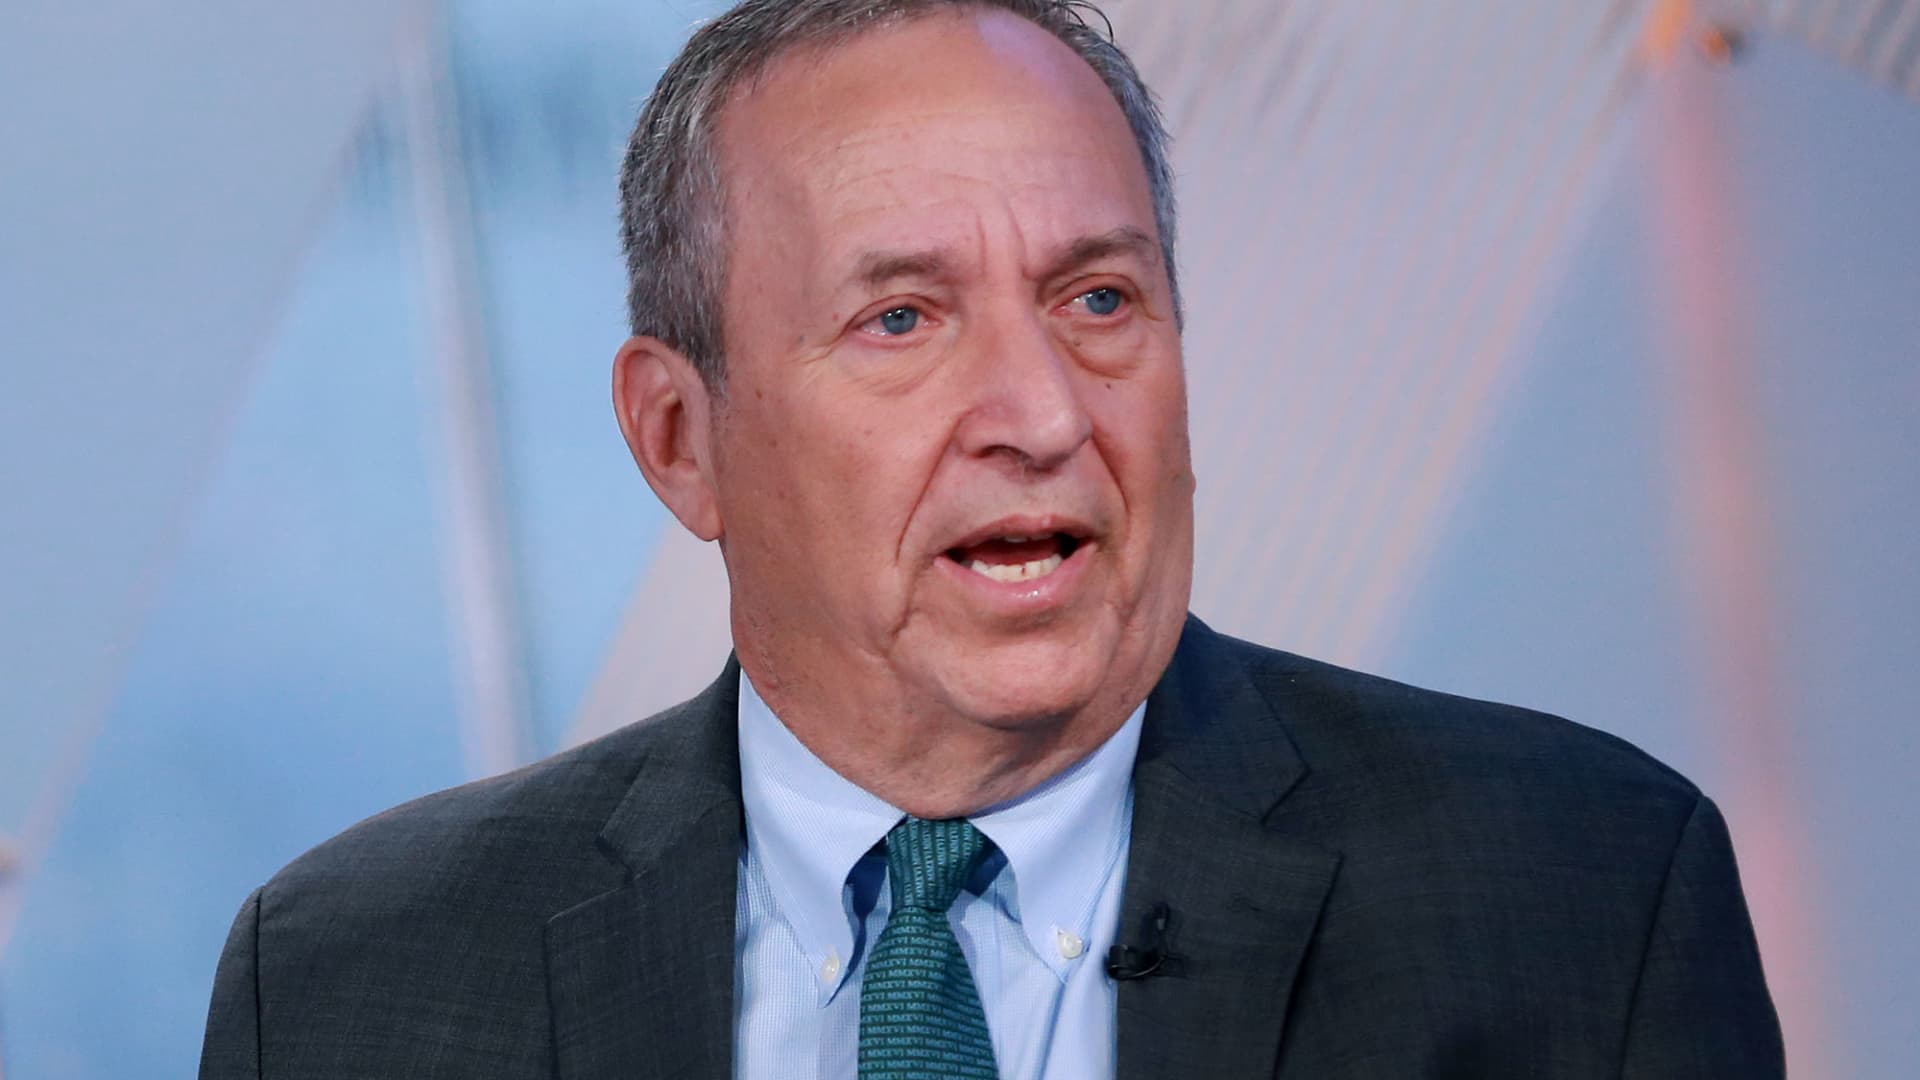 Larry Summers blasts UK tax cuts as 'utterly irresponsible' and warns of possible contagion